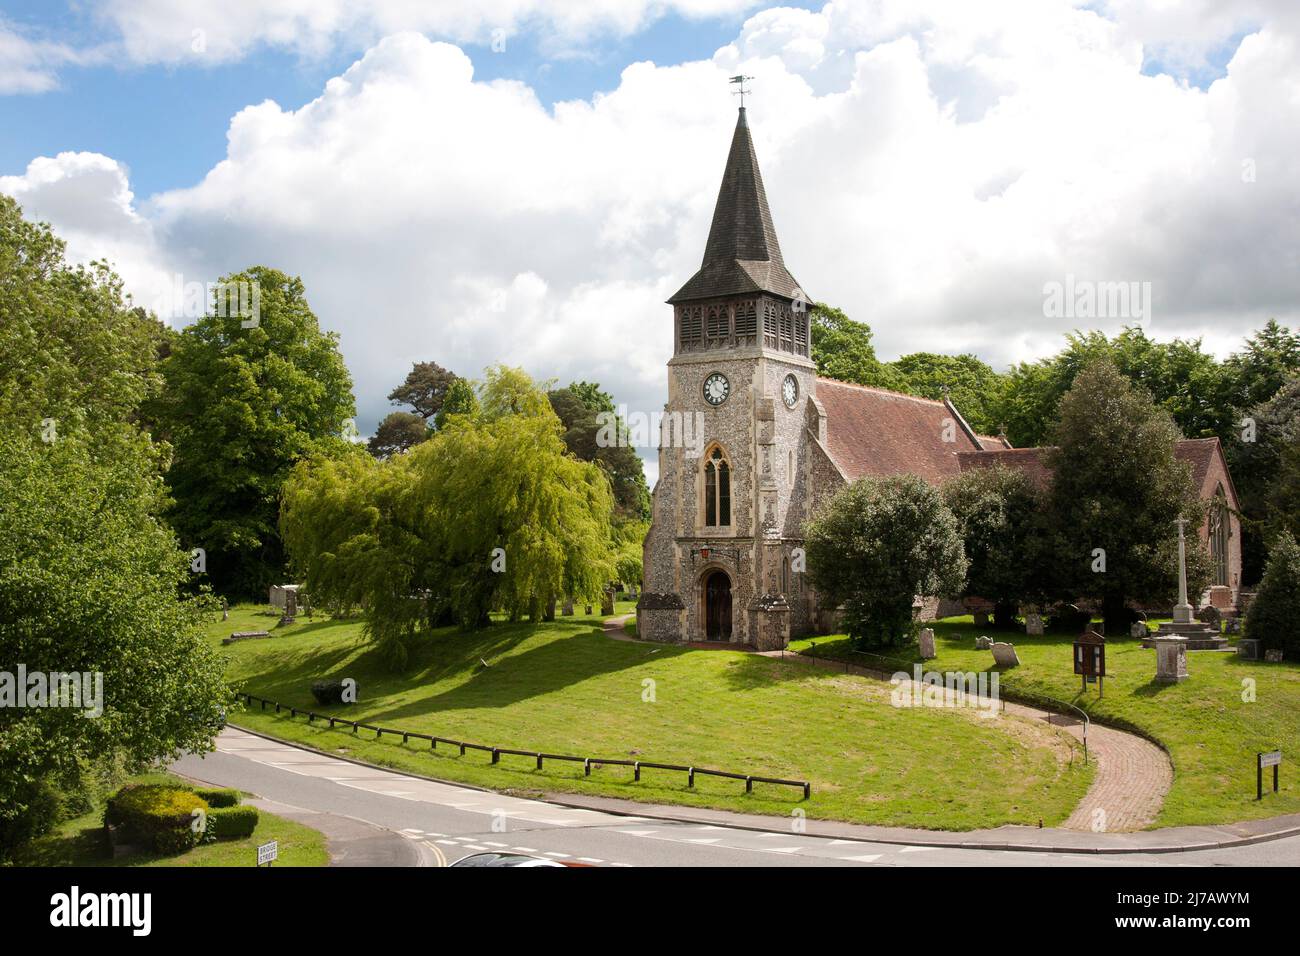 St Nicholas Church, Wickham, Meon Valley, Hampshire, dates back to 1120 and sits on a large sacred mound. Stock Photo